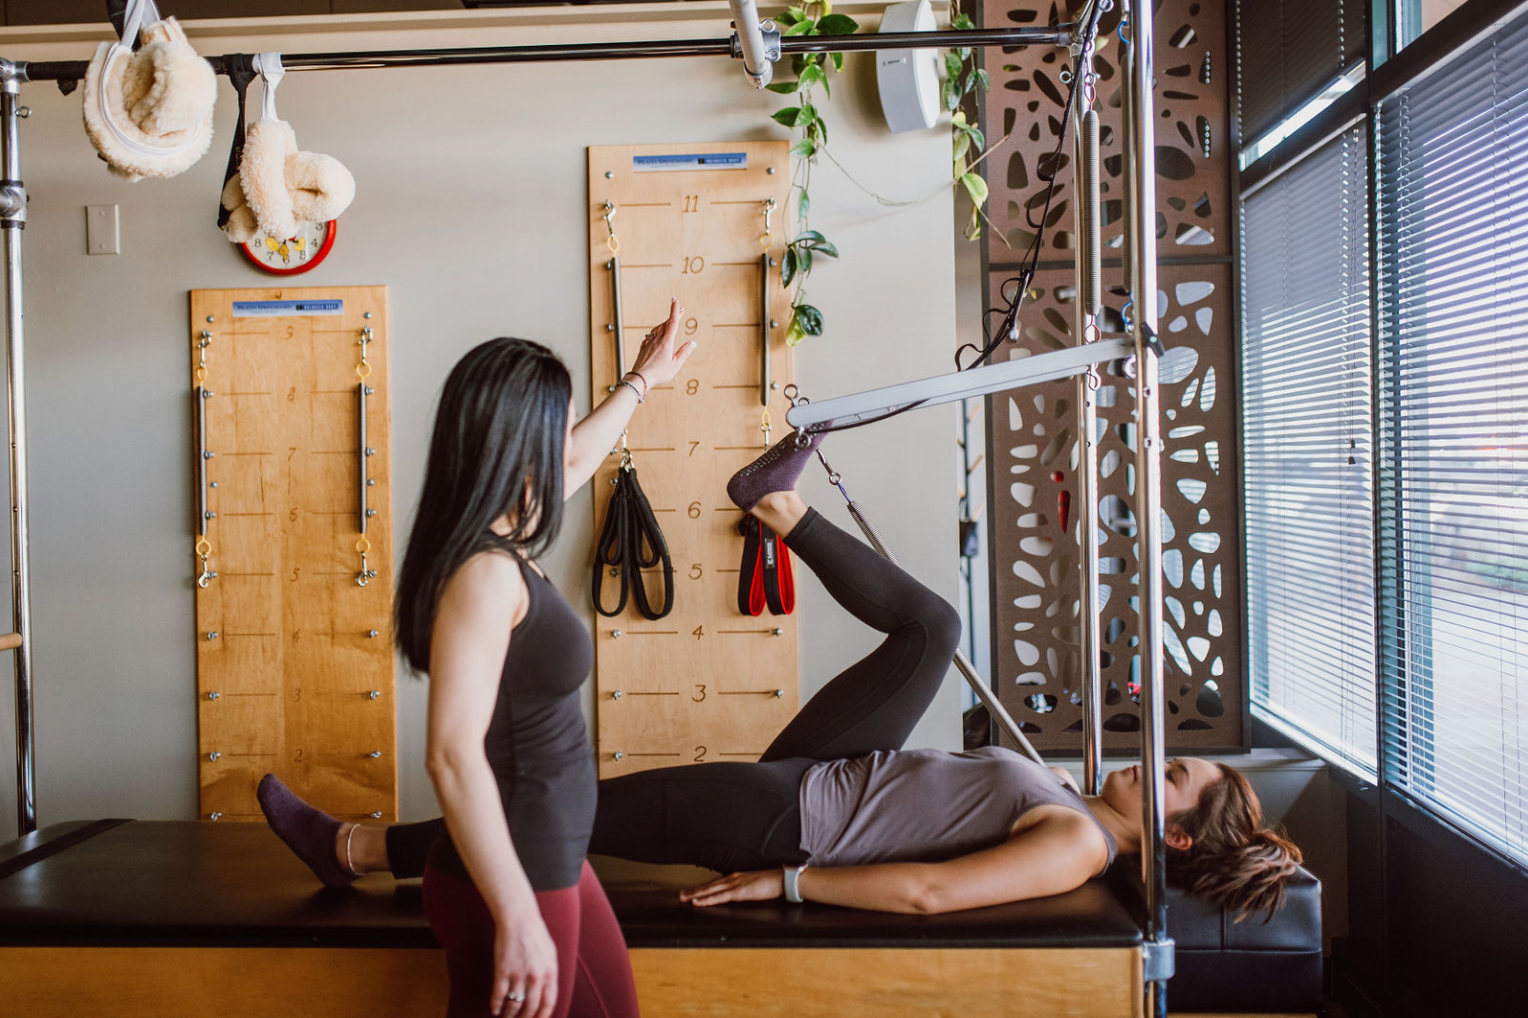 The Anatomy of a Pilates Lesson